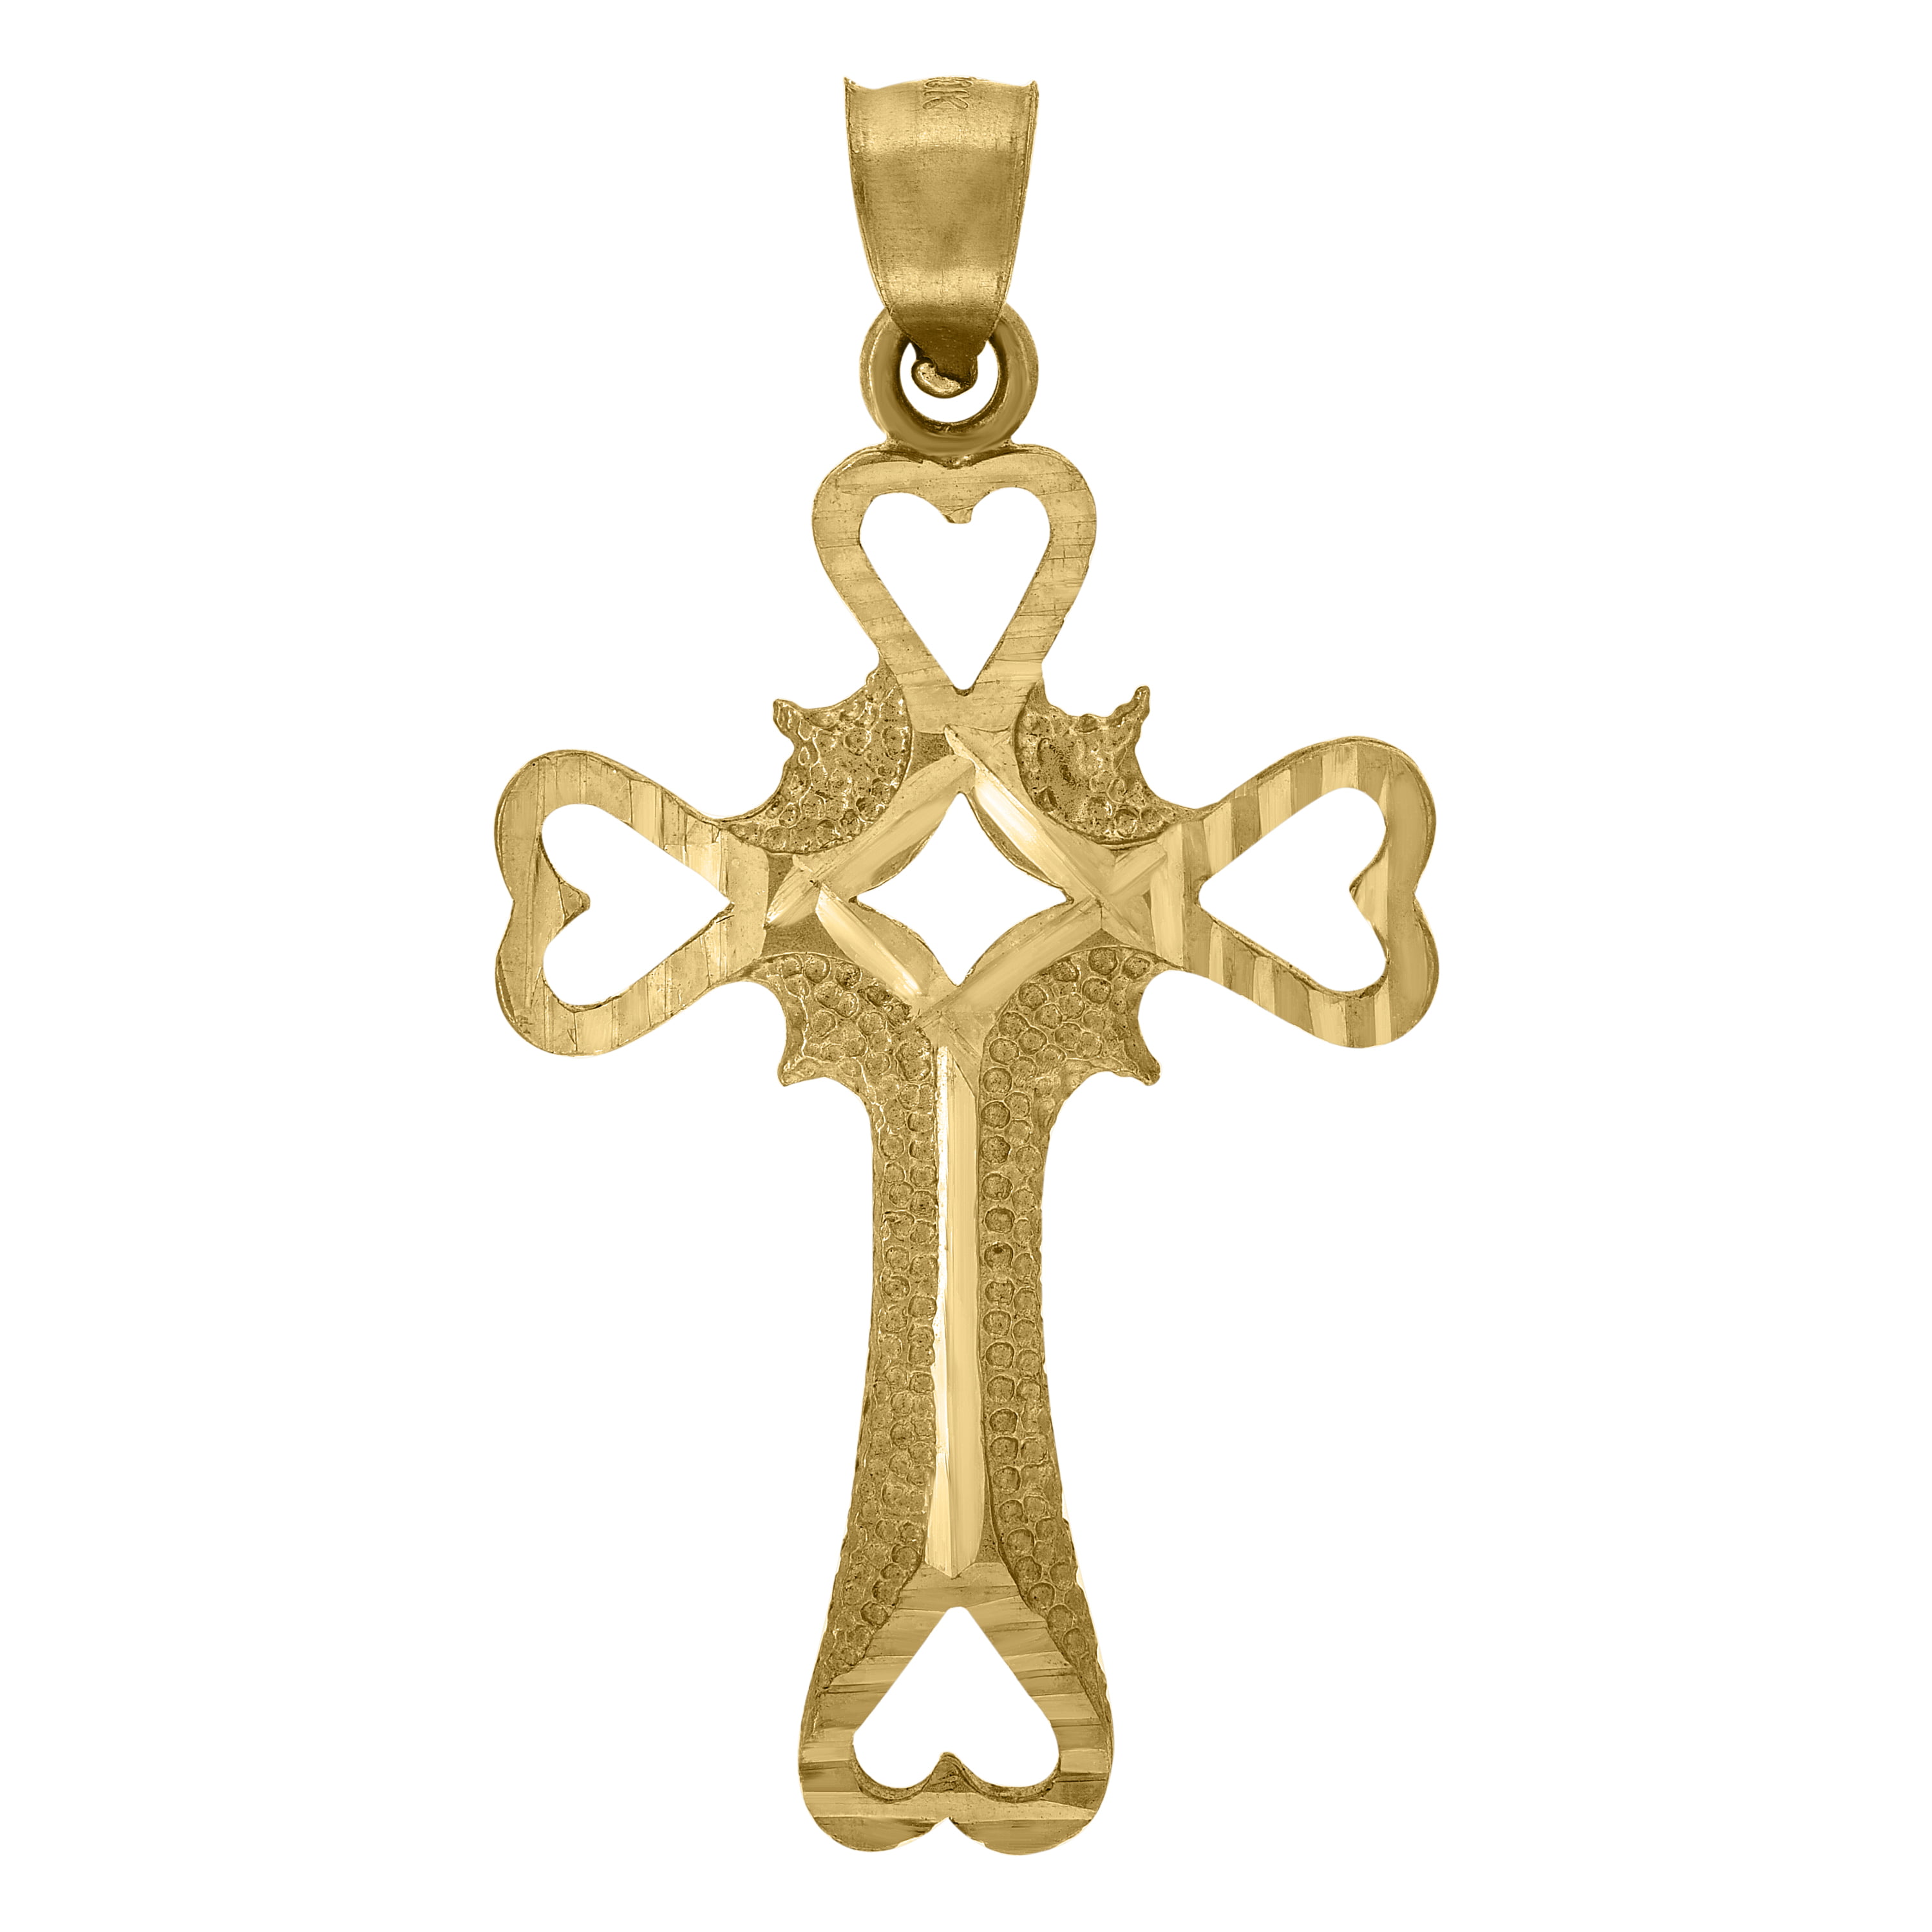 SNTSLV-1 Details about   10kt Yellow Gold Womens Mens Unisex Cross Heart Fashion Charm Pendant 